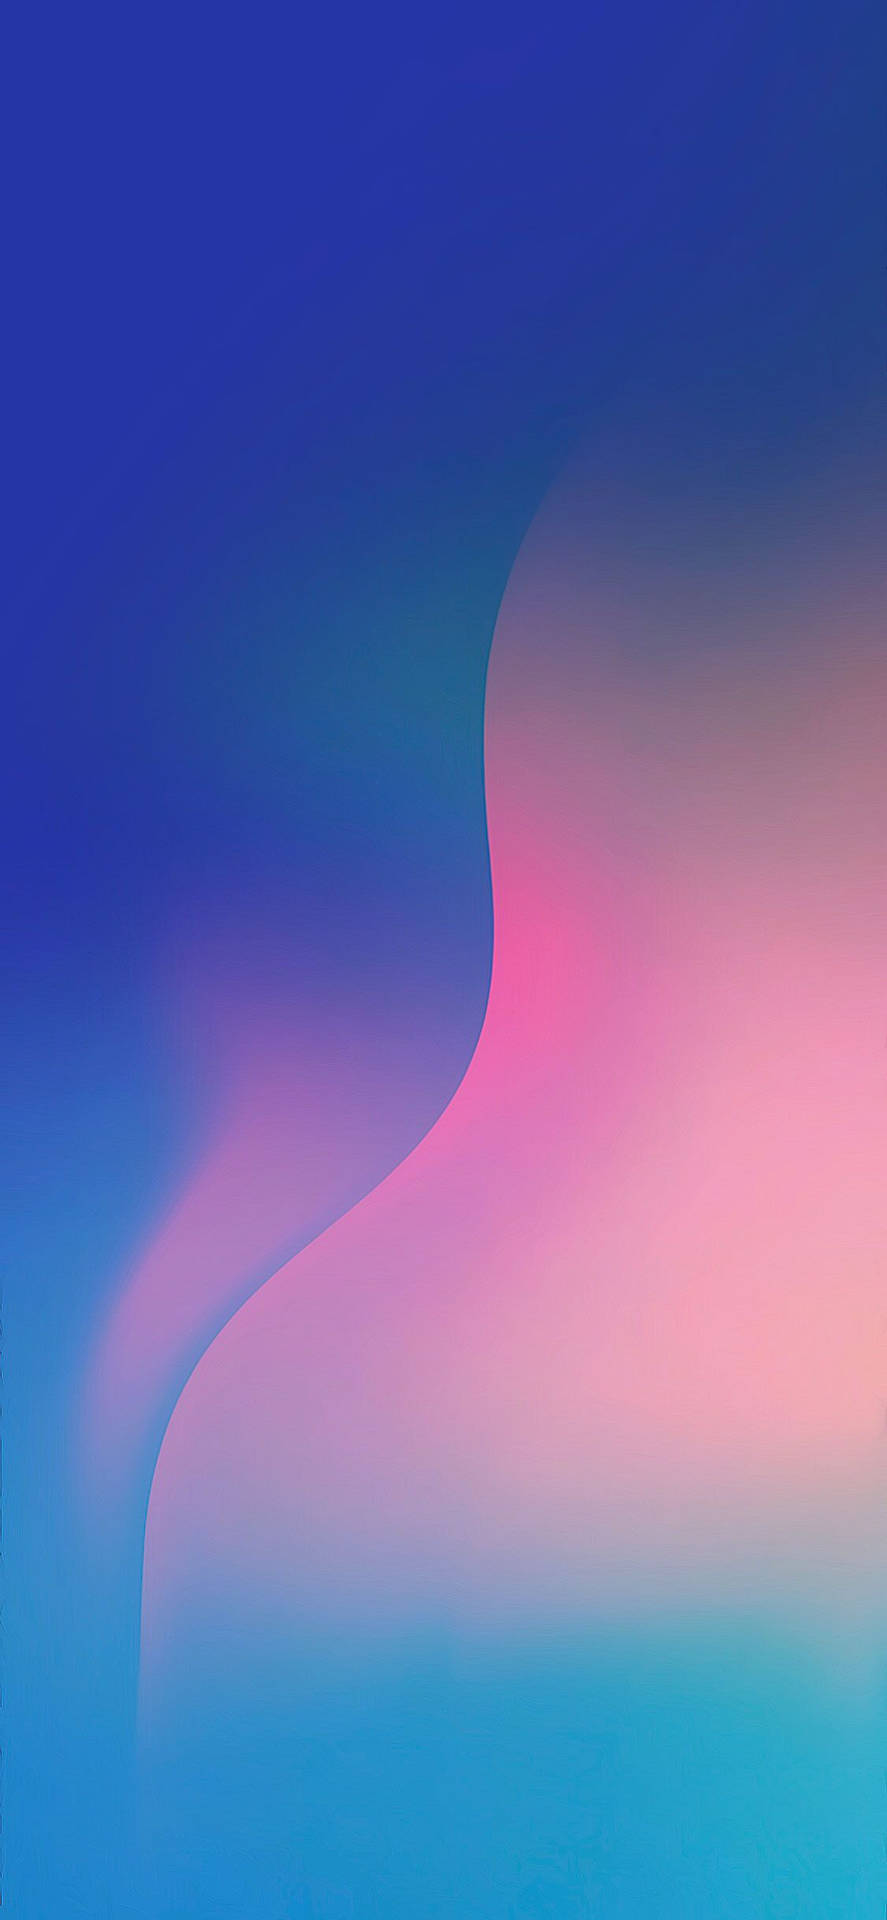 Get the Best Out of Your iPhone X With the Best Wallpaper Background Wallpaper